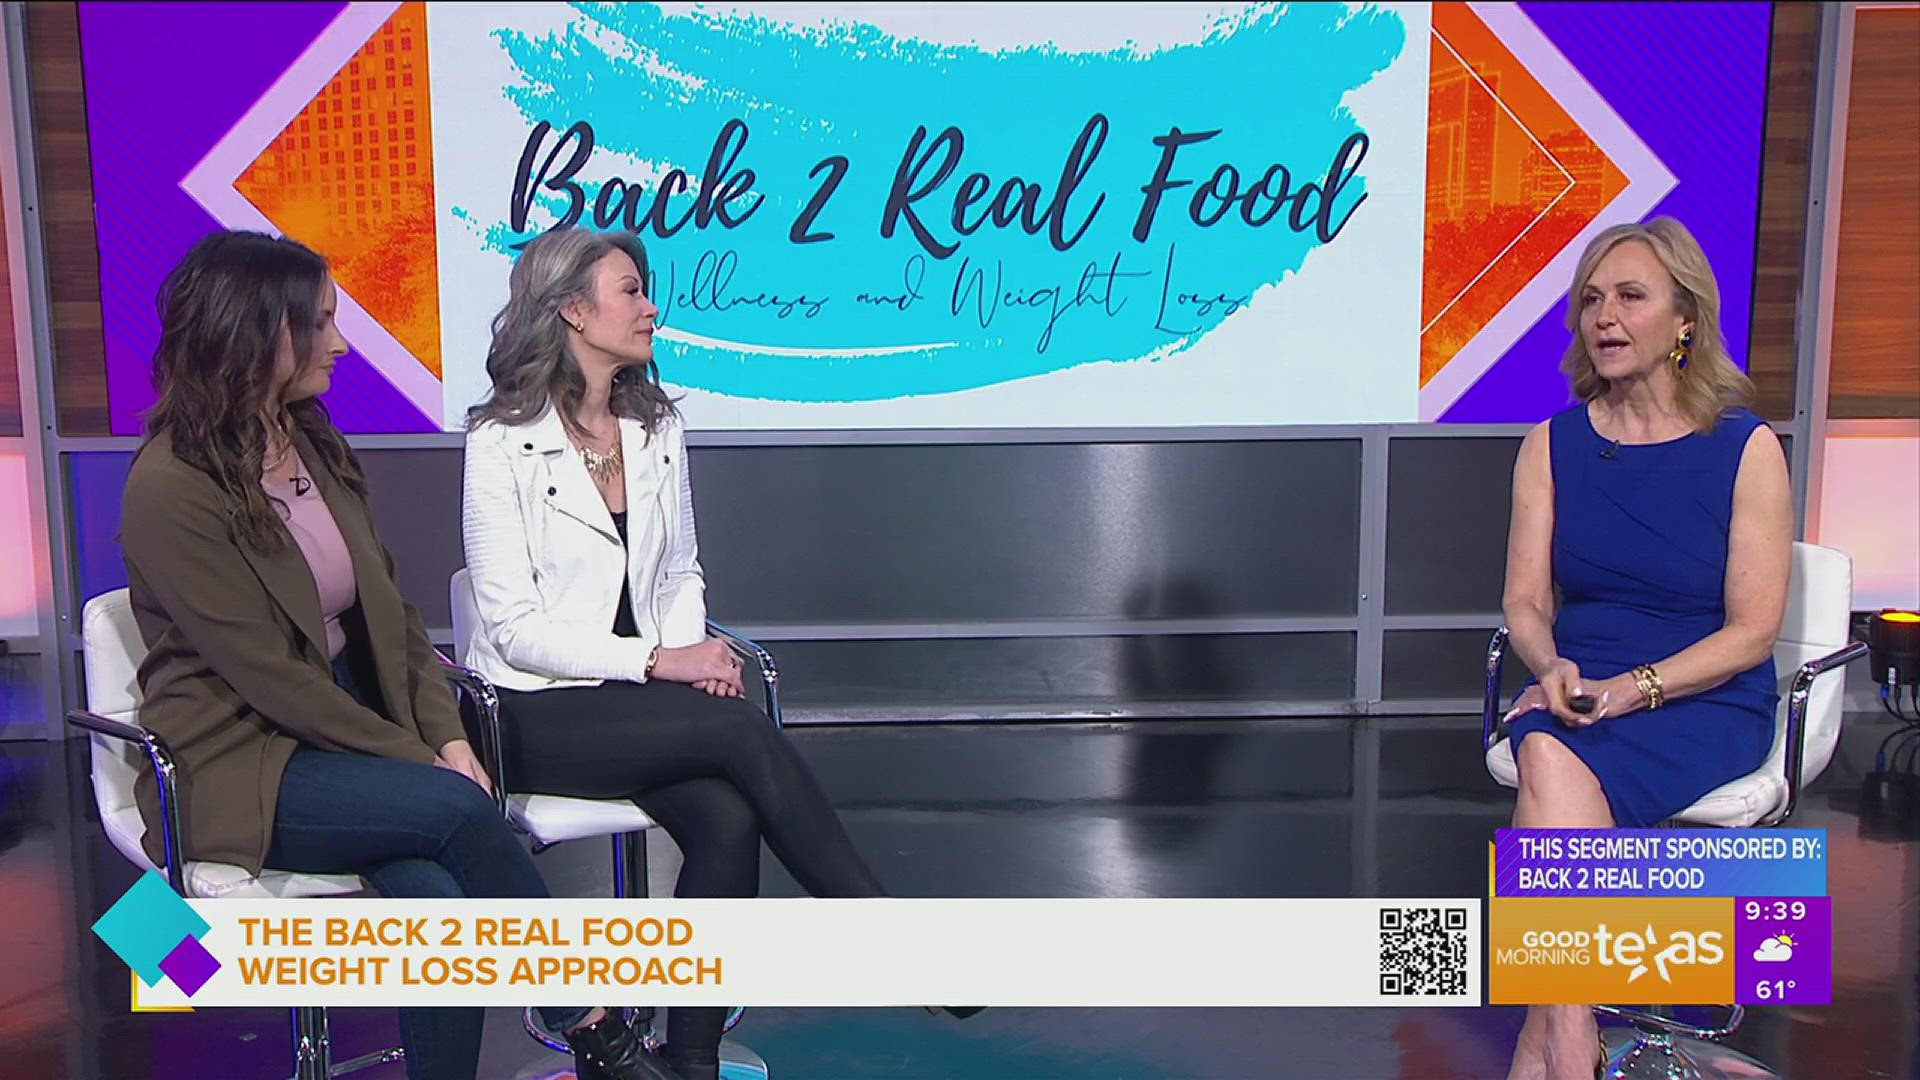 This segment is sponsored by Back 2 Real Food. Call 833.668.4883 or visit back2realfood.com for more information.